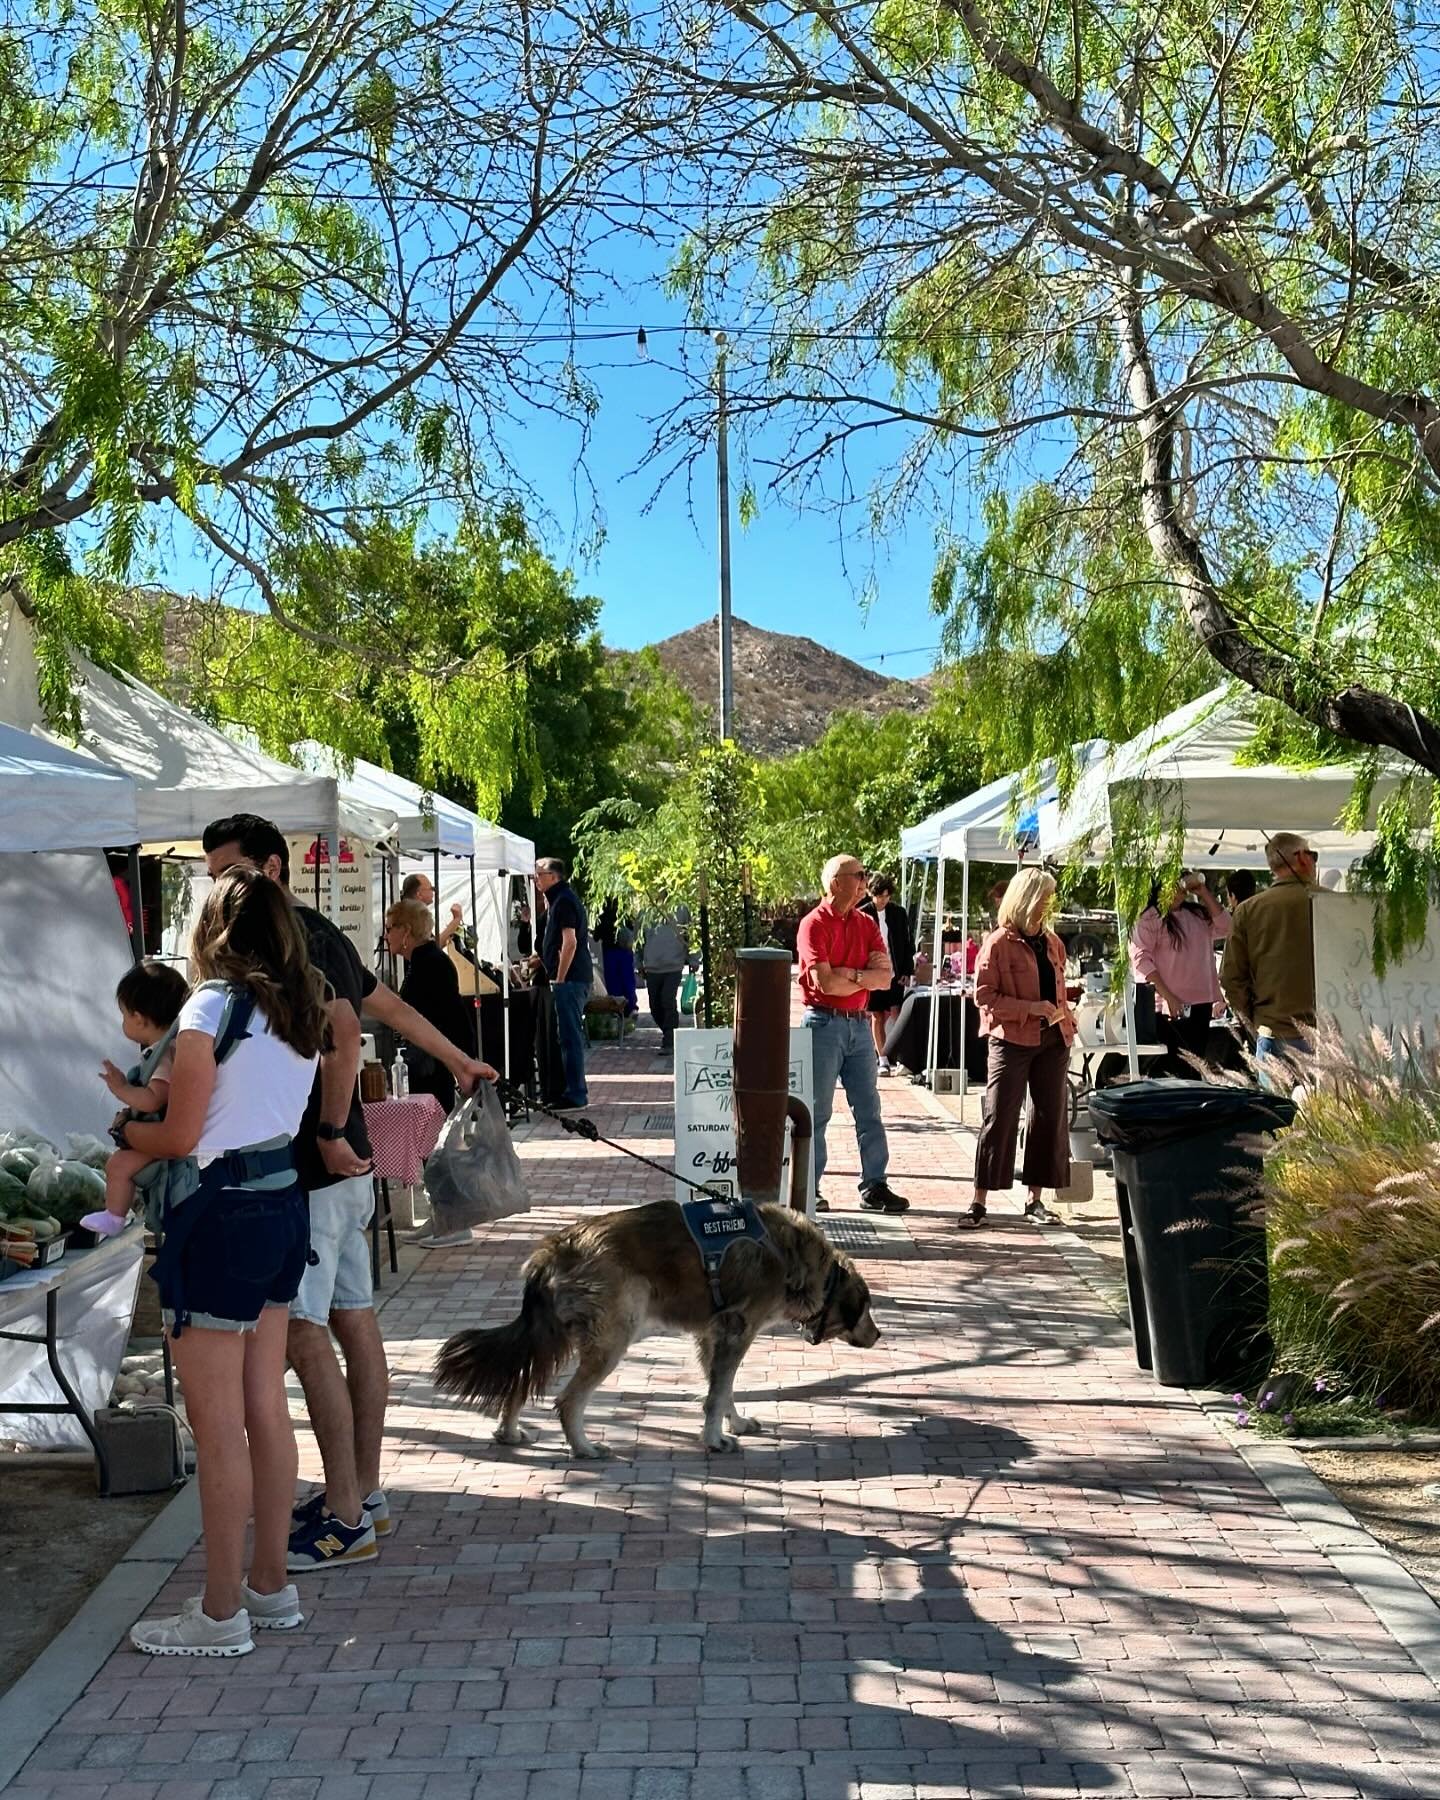 It&rsquo;s a beautiful morning for a farmers&rsquo; market!  #farmersmarketatadc #farmersmarketatardovinosdesertcrossing #nmfma #newmexicotrue #sunlandparknm #elpasotx #localvendors #aslocalasitgets #ardovinosdesertcrossing #ardovinosdc #locallygrown